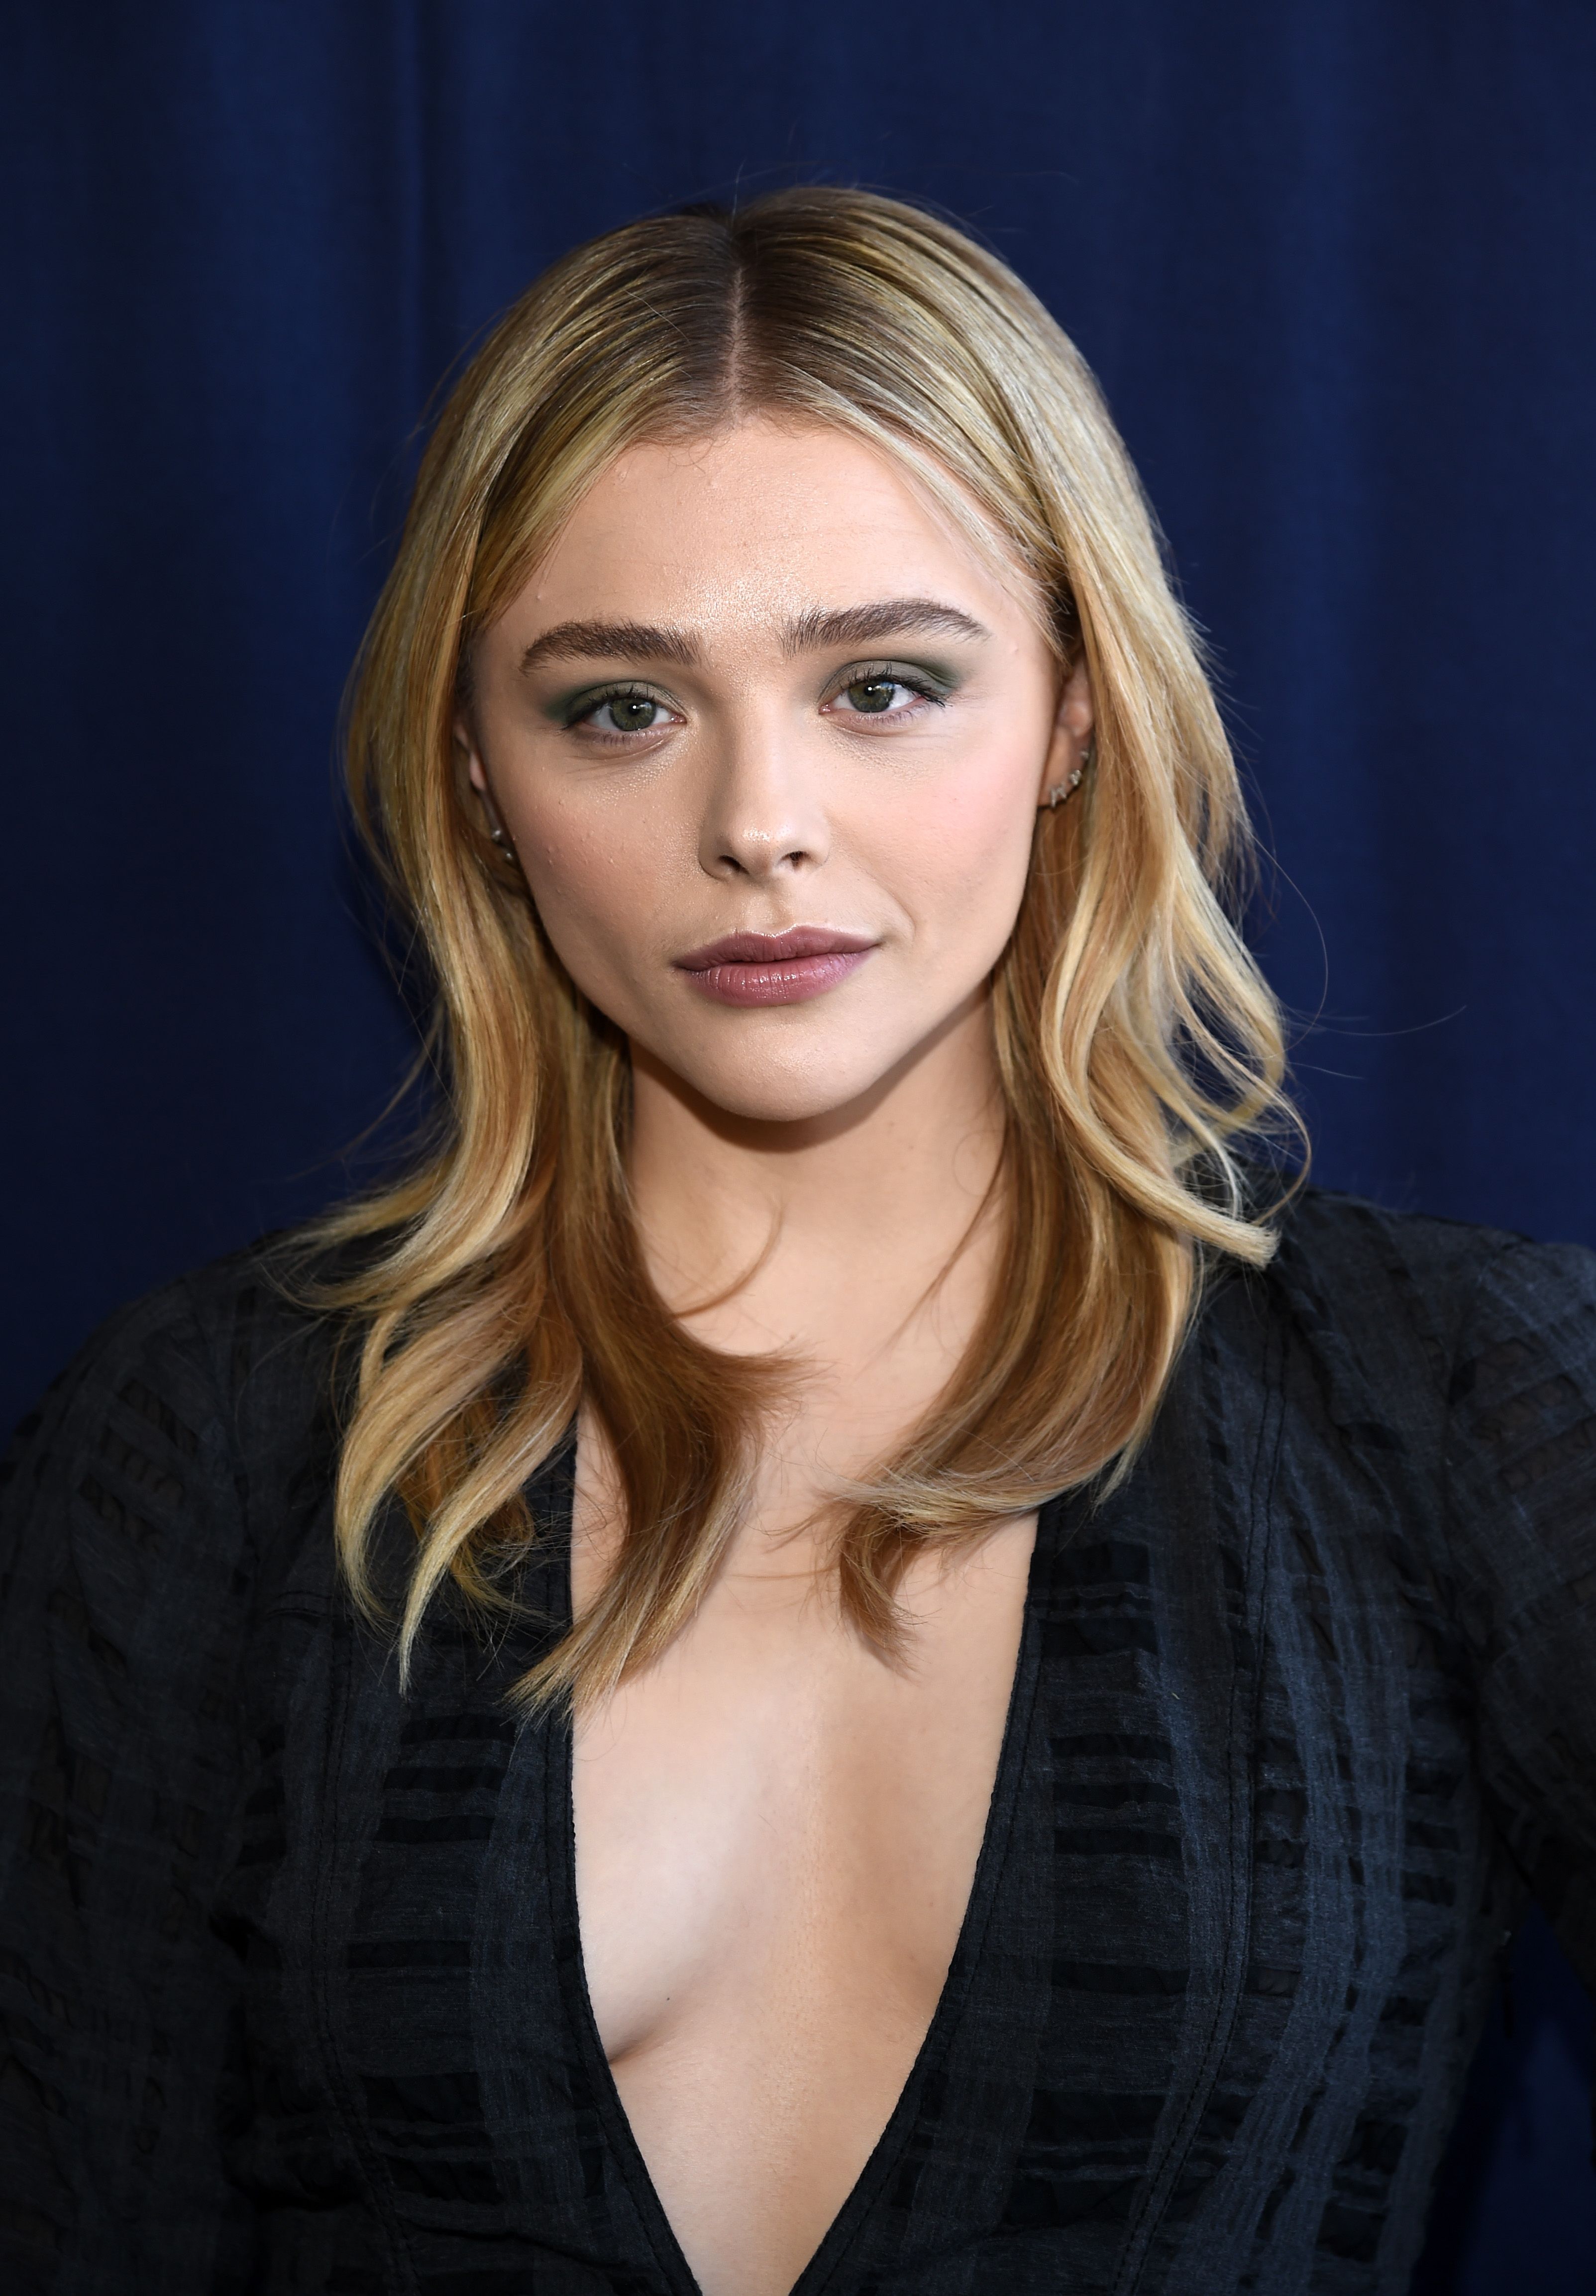 Chloe Grace Moretz says there should be no age limit for LGBTQ+ education